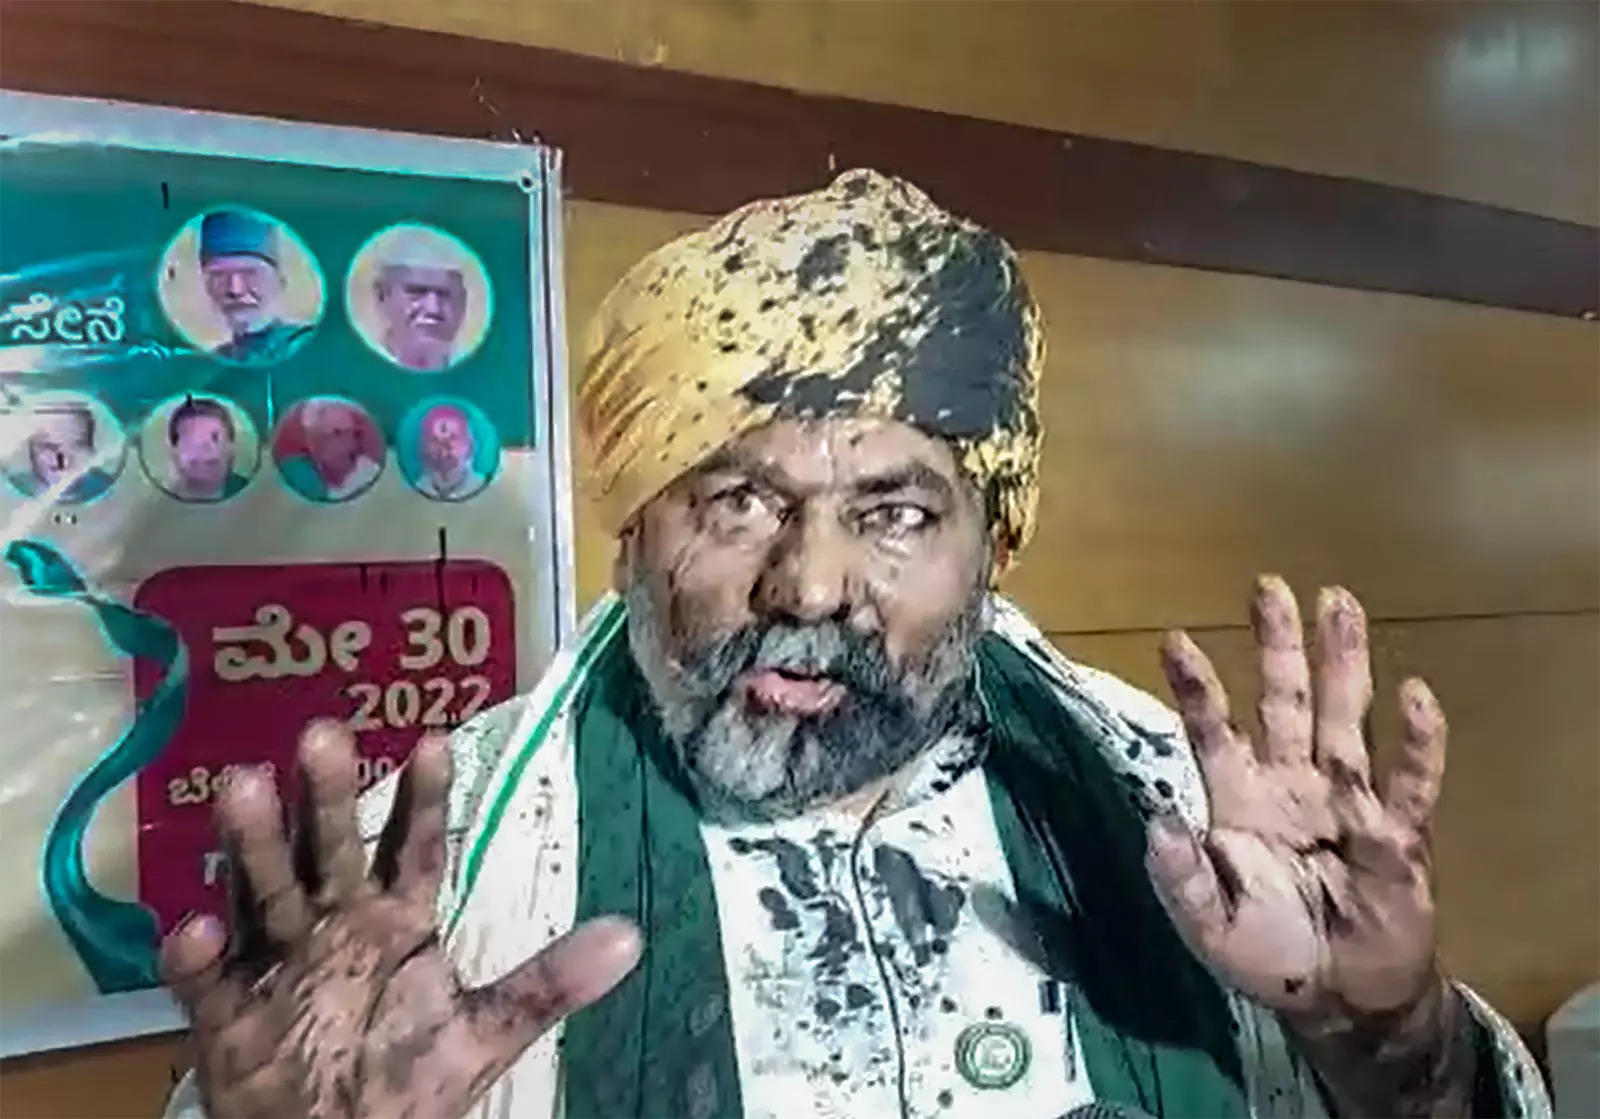 BKU Spokesperson and farmer leader Rakesh Tikait interacts with media after an unidentified person threw ink on him, during an event, in Bengaluru. (PTI)